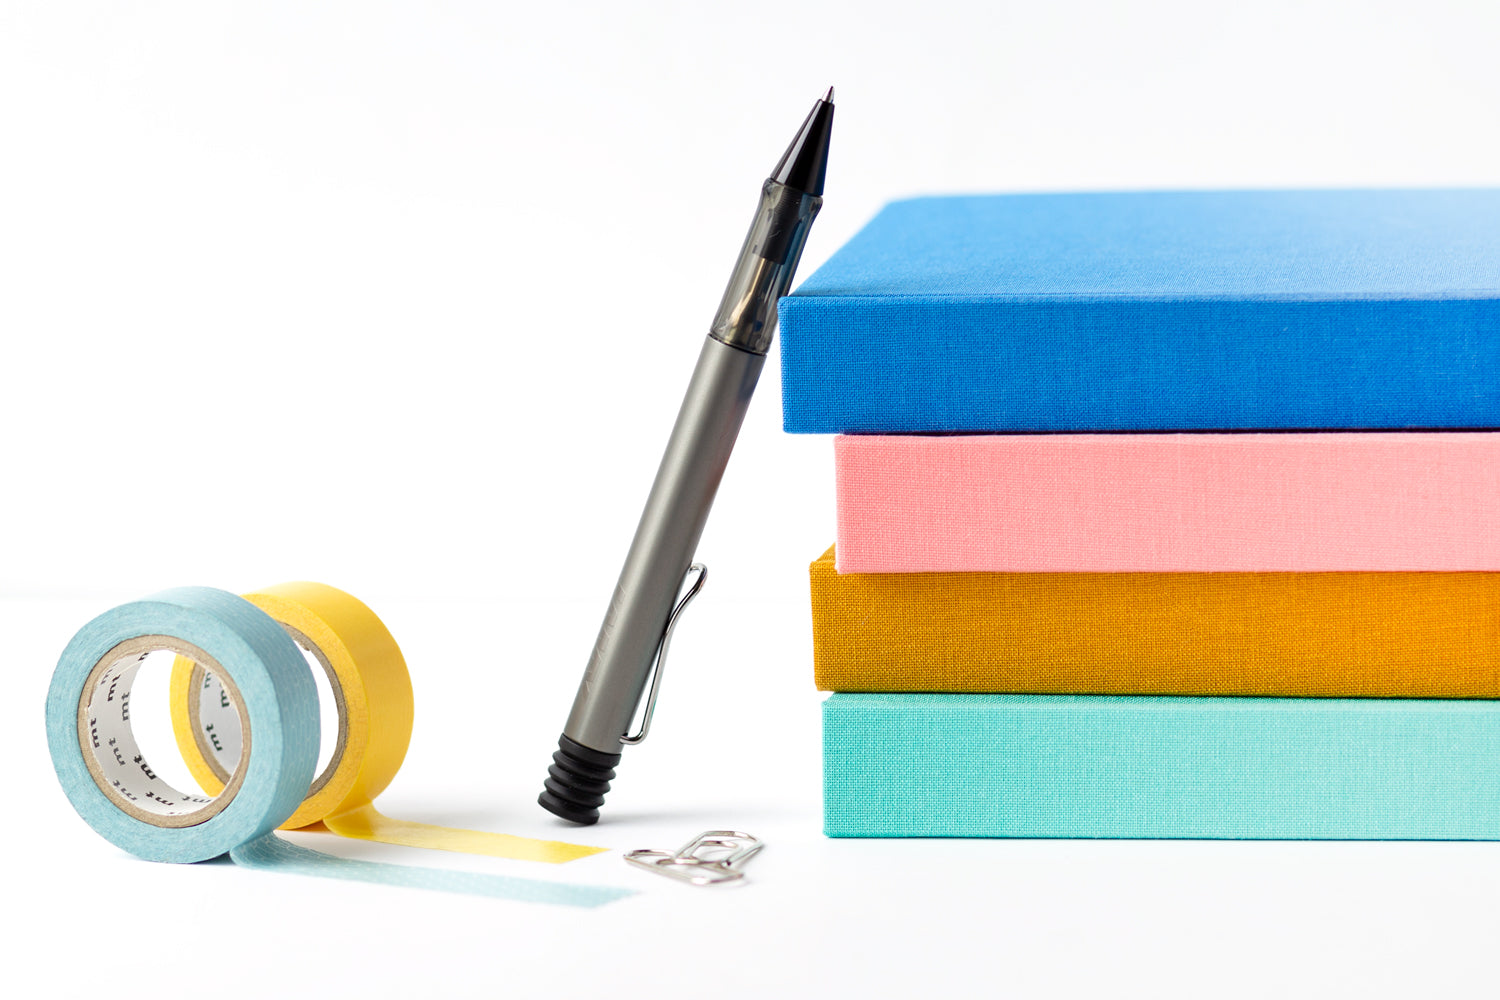 A stack of colorful planners sit on a white background with a pen and two rolls of colorful washi tape.